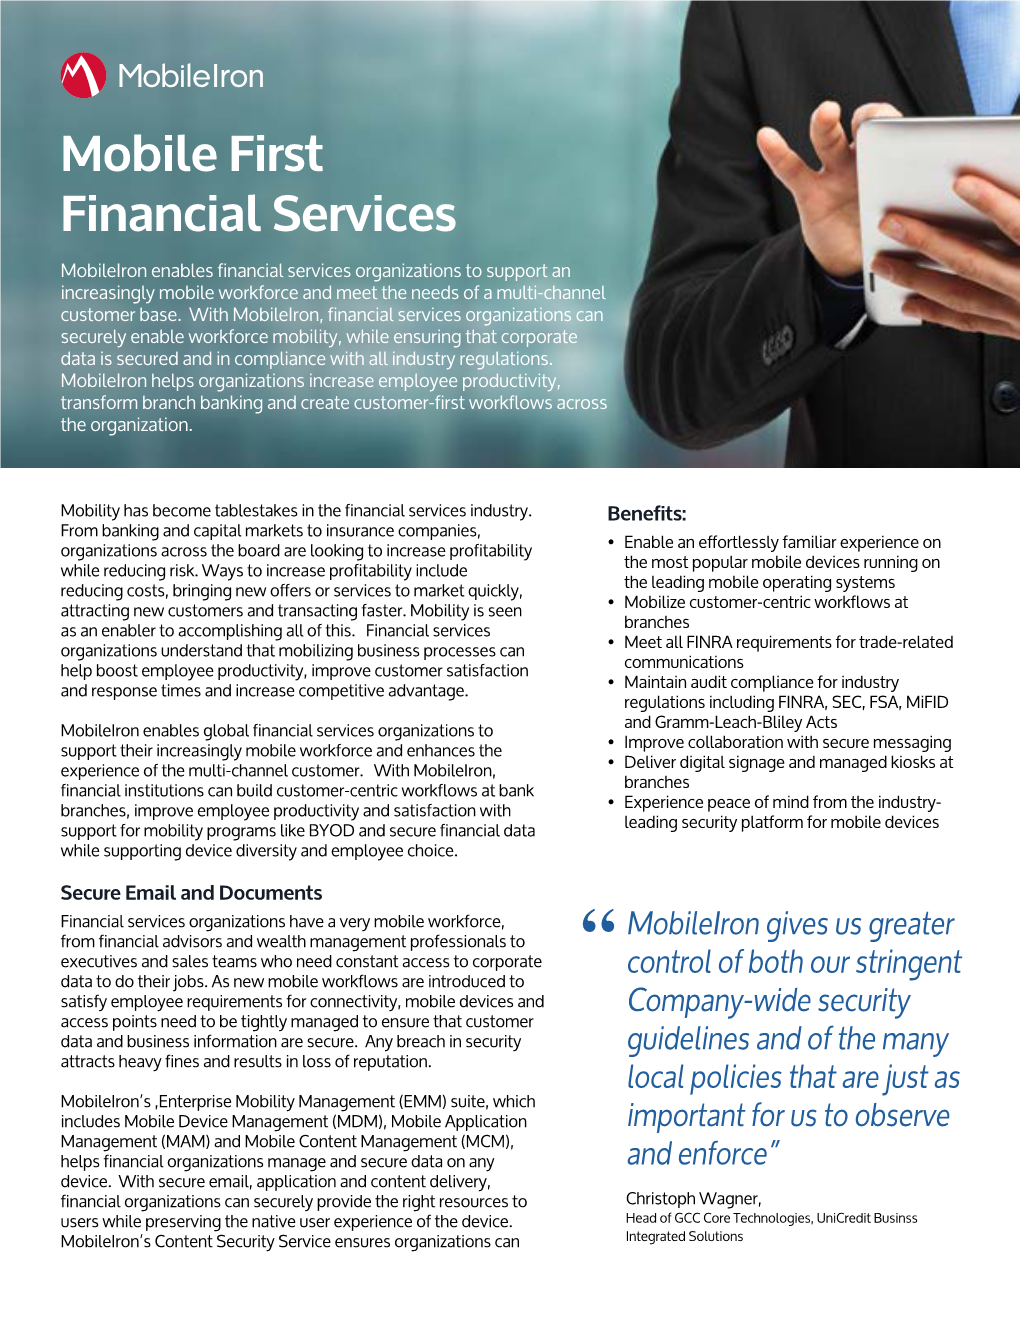 Mobile First Financial Services